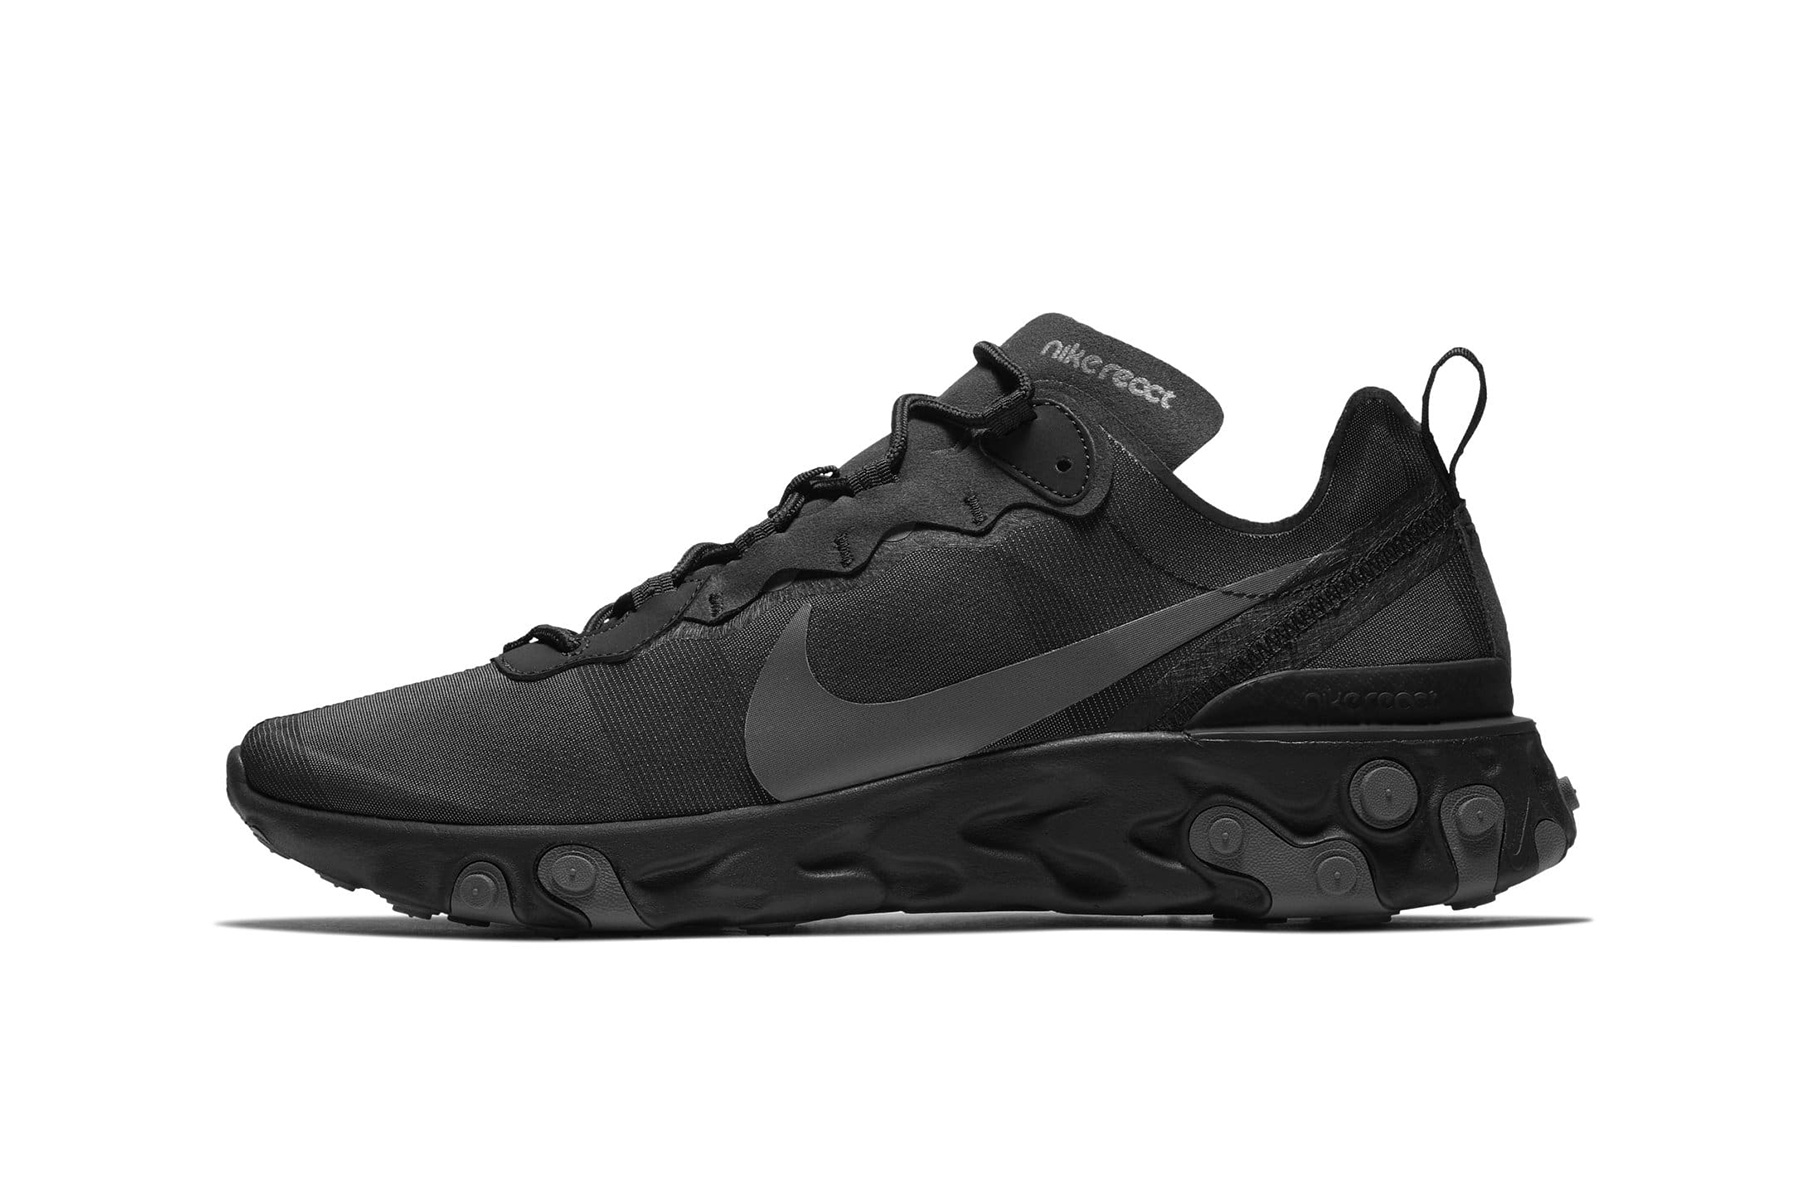 Nike React Element 55 in \